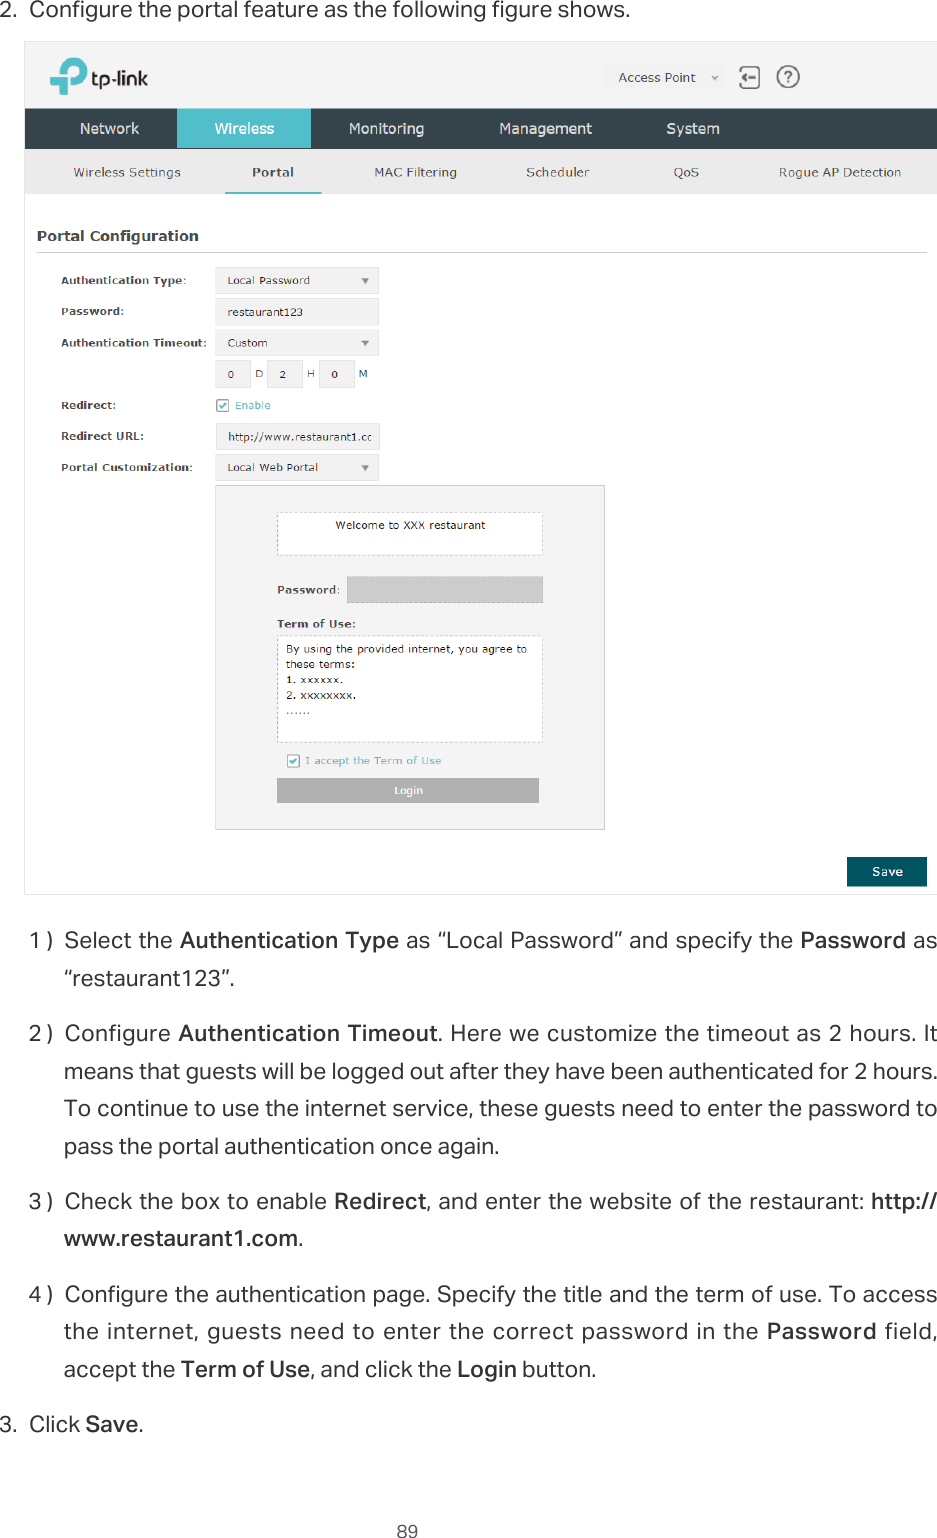  892. Configure the portal feature as the following figure shows.1 ) Select the Authentication Type as “Local Password” and specify the Password as “restaurant123”.2 ) Configure Authentication Timeout. Here we customize the timeout as 2 hours. It means that guests will be logged out after they have been authenticated for 2 hours. To continue to use the internet service, these guests need to enter the password to pass the portal authentication once again.3 ) Check the box to enable Redirect, and enter the website of the restaurant: http://www.restaurant1.com.4 ) Congure the authentication page. Specify the title and the term of use. To access the internet, guests need to enter the correct password in the Password field, accept the Term of Use, and click the Login button.3. Click Save.